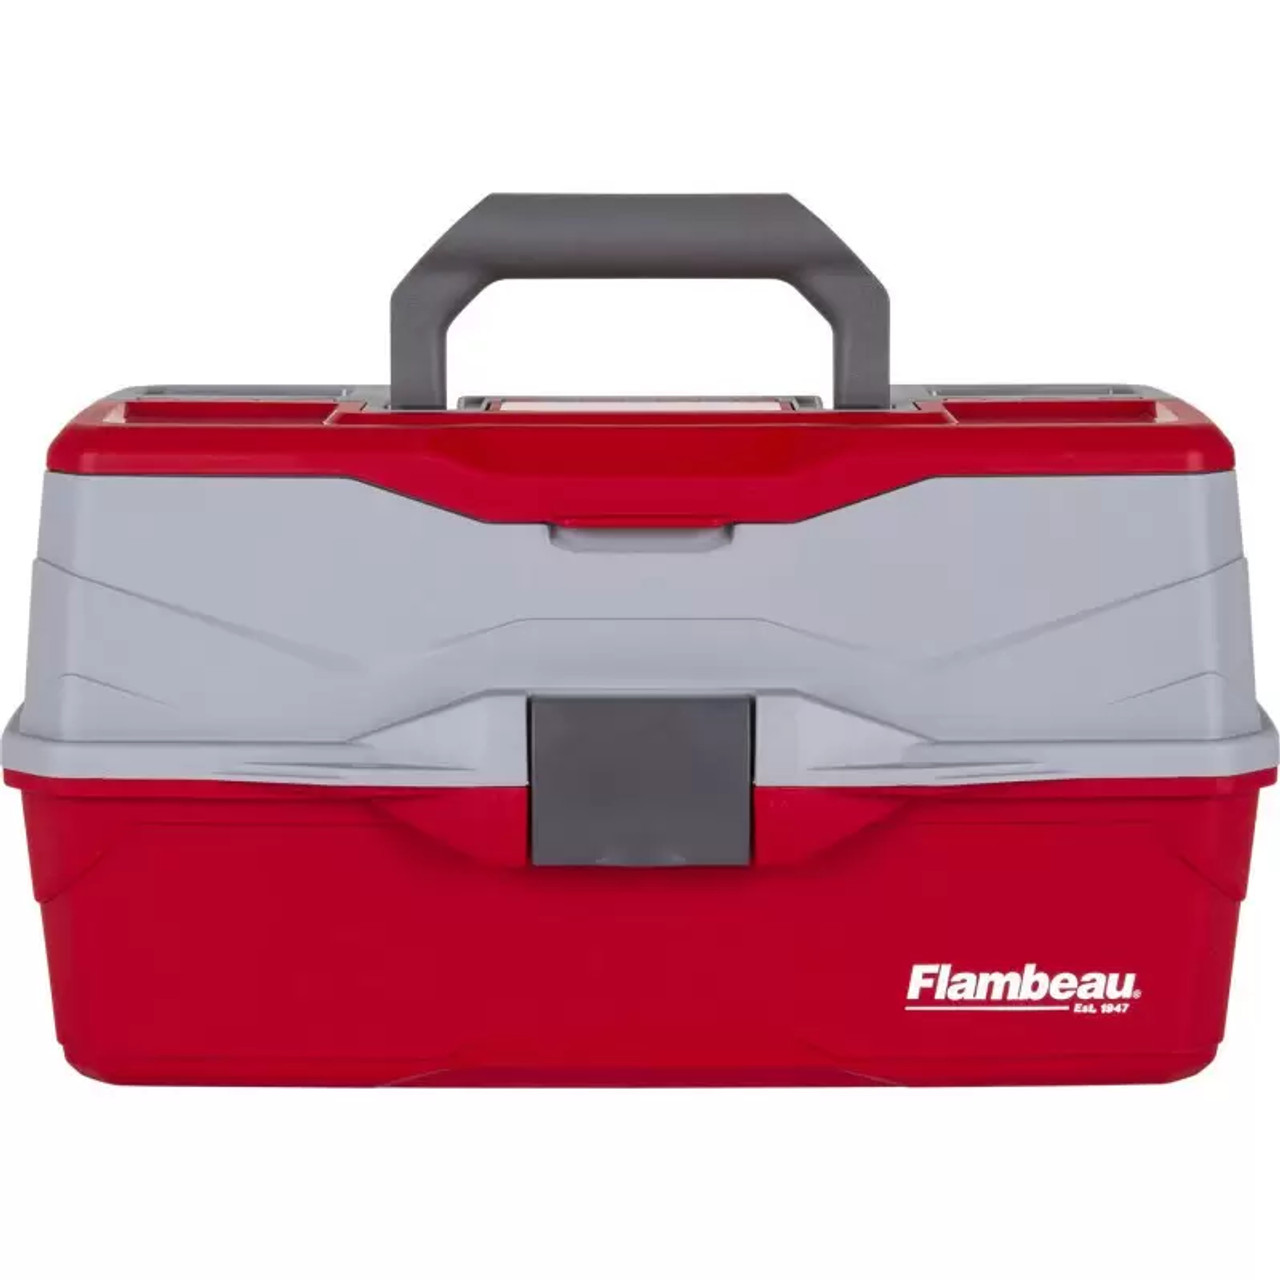 Flambeau 3-Tray Hard Tackle Box- Red, w/Flip-top lid accessory compartment